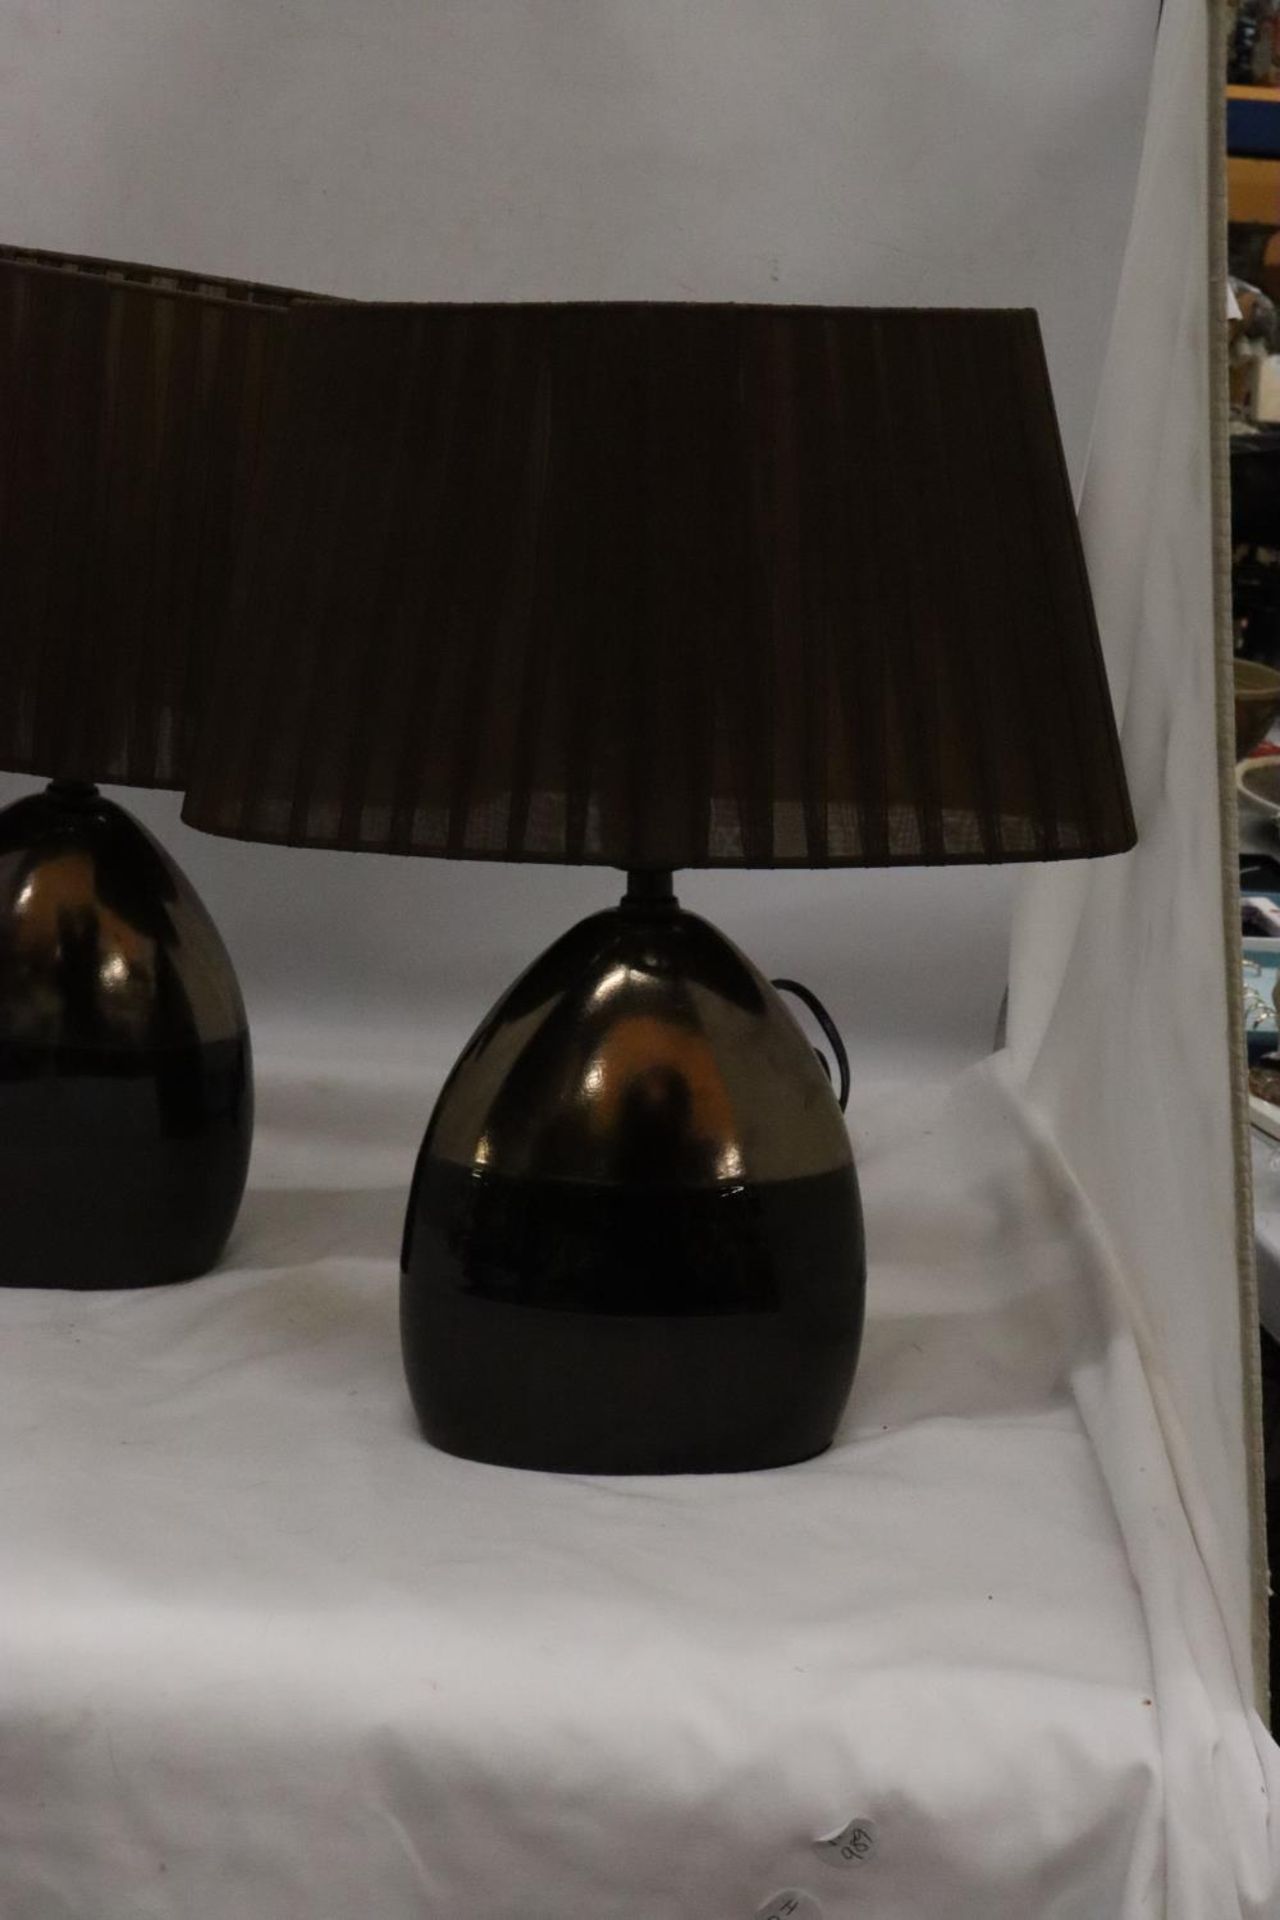 A PAIR OF MODERN TABLE LAMPS WITH SHADES - Image 2 of 4